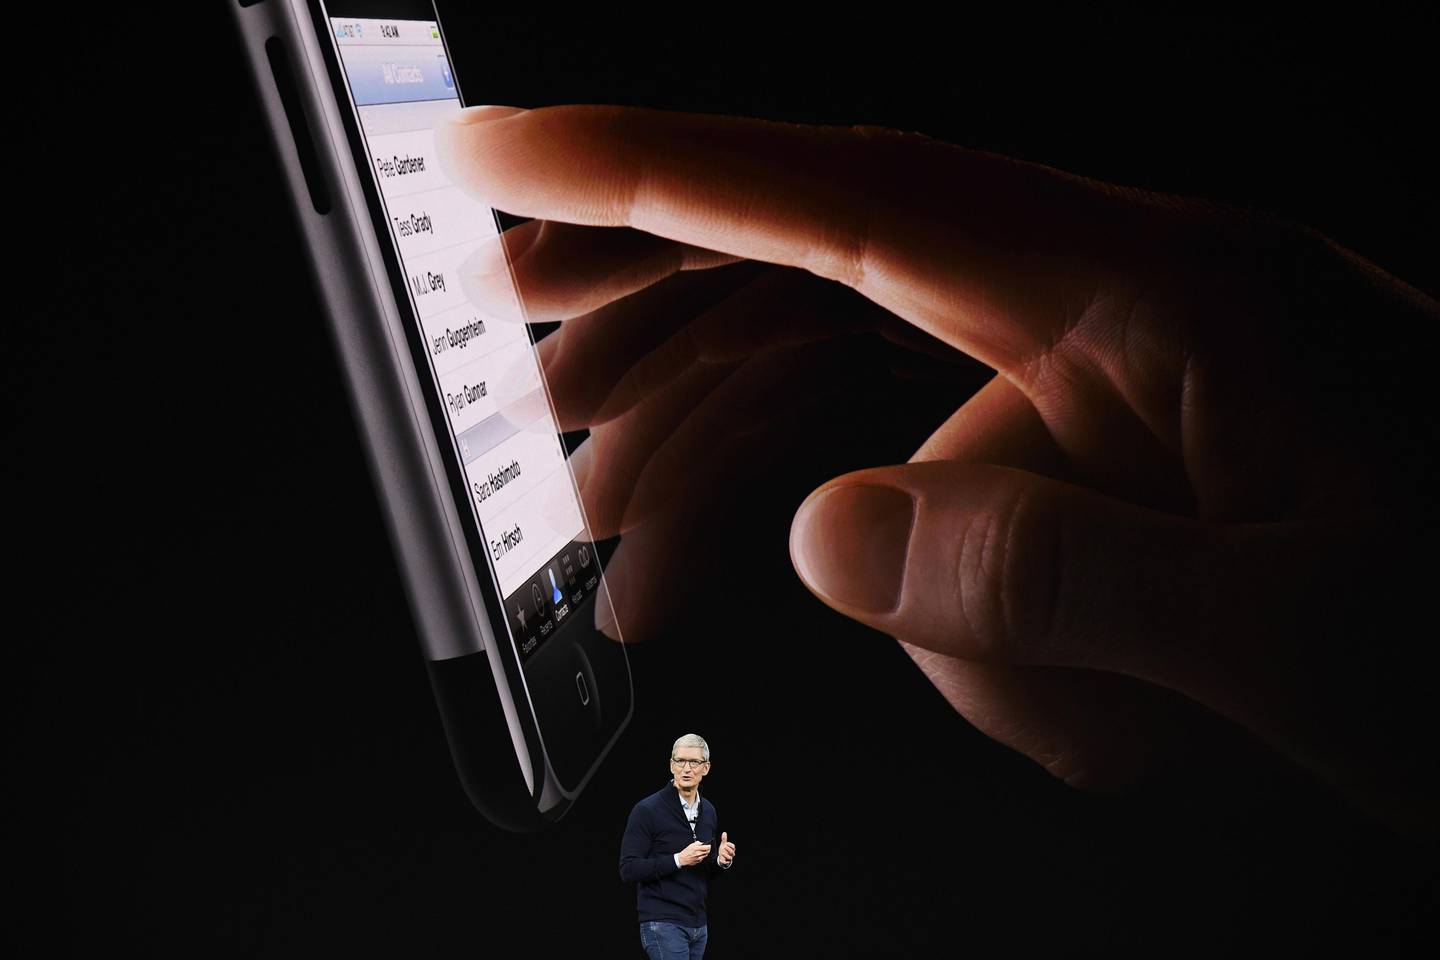 Tim Cook, chief executive officer of Apple Inc., speaks about the iPhone during an event at the Steve Jobs Theater in Cupertino, California, U.S., on Tuesday, Sept. 12, 2017. Apple Inc.��unveiled a new Watch on Tuesday that can make calls and access the internet without an iPhone nearby, freeing the device from a limitation that had given some potential buyers pause. Photographer: David Paul Morris/Bloomberg